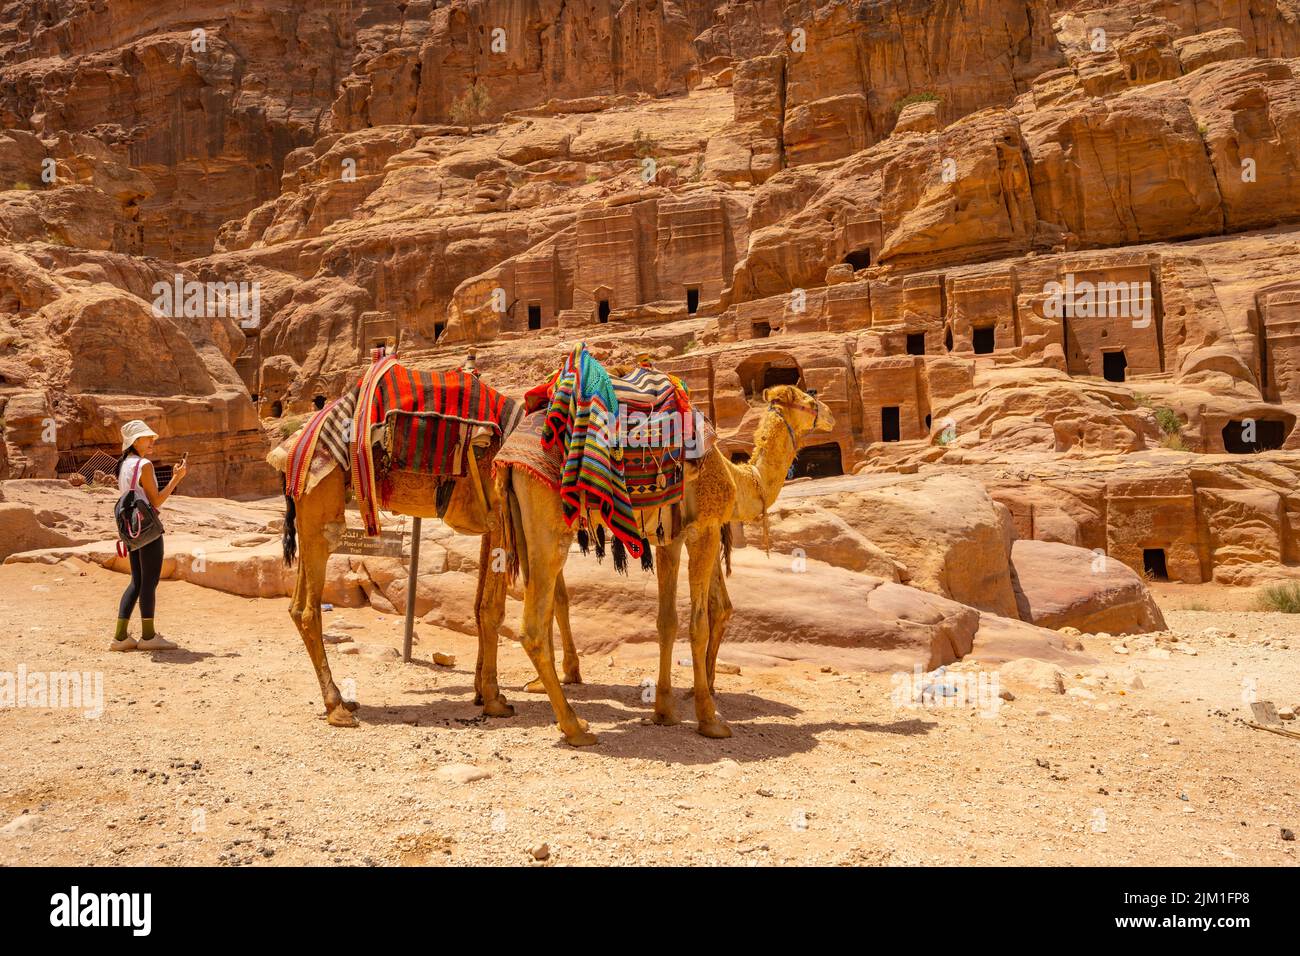 Camels in The Street of Fascades in Petra Jordan Stock Photo